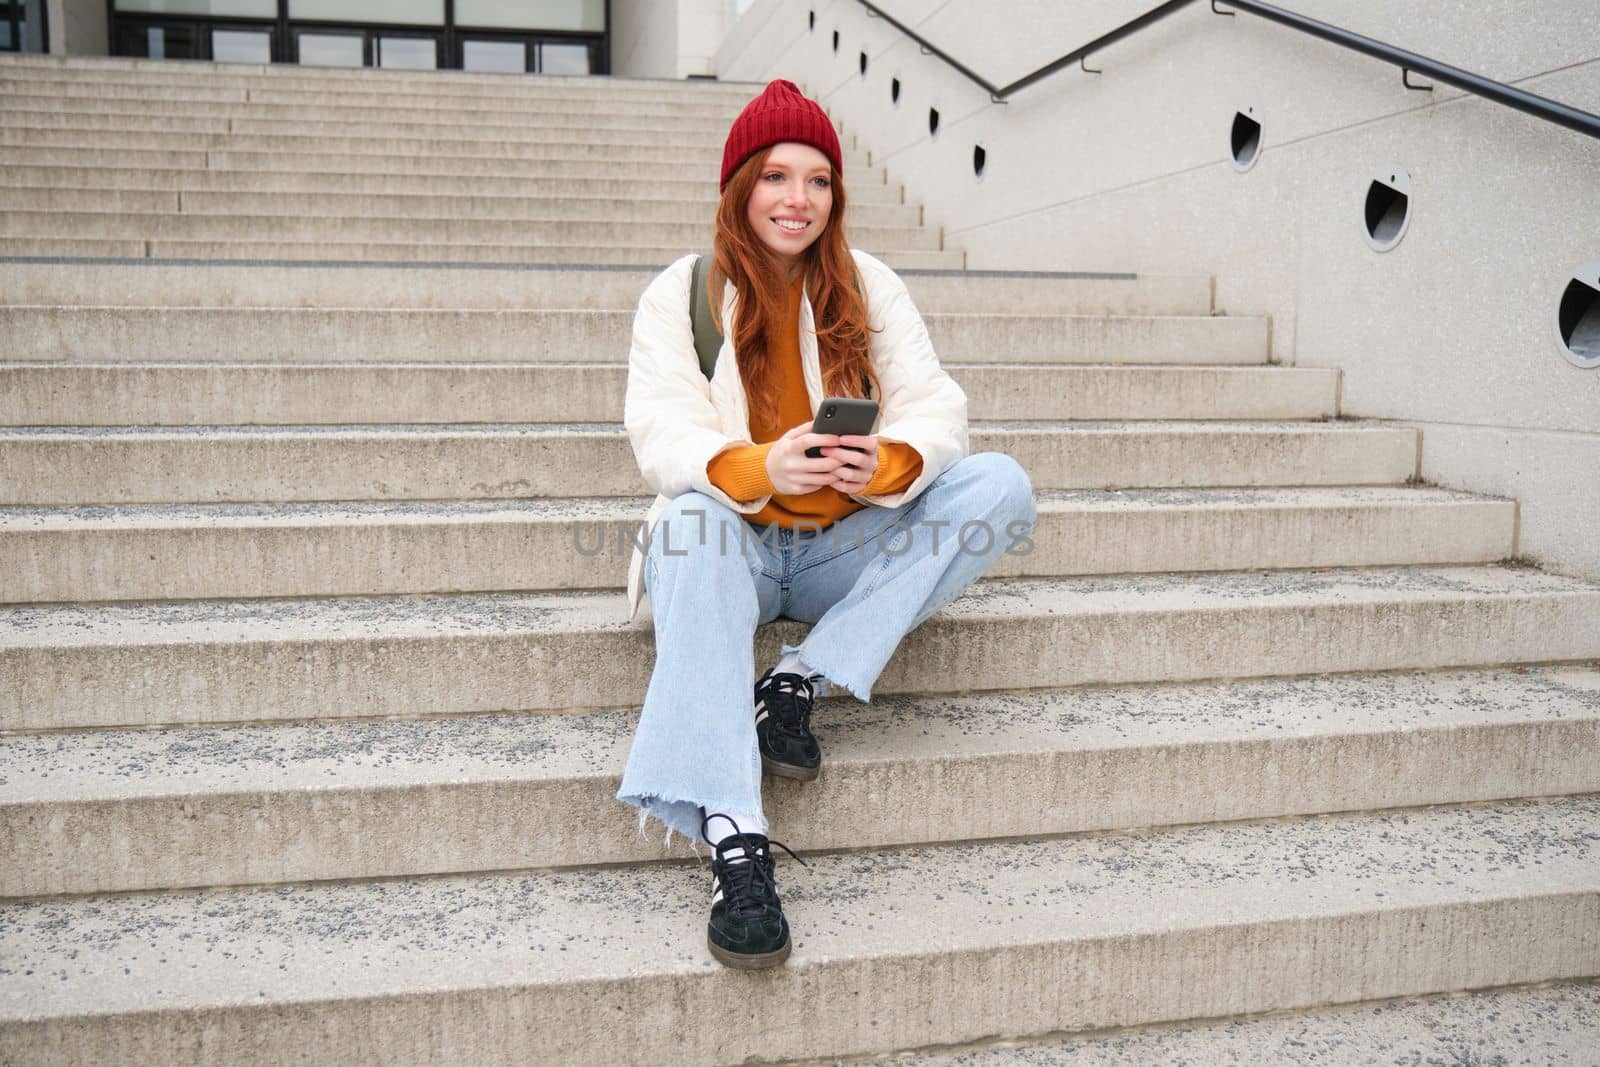 City lifestyle and mobile phone. Smiling college girl with red hair, sits on public stairs on street with smartphone, reads message, uses social media app.